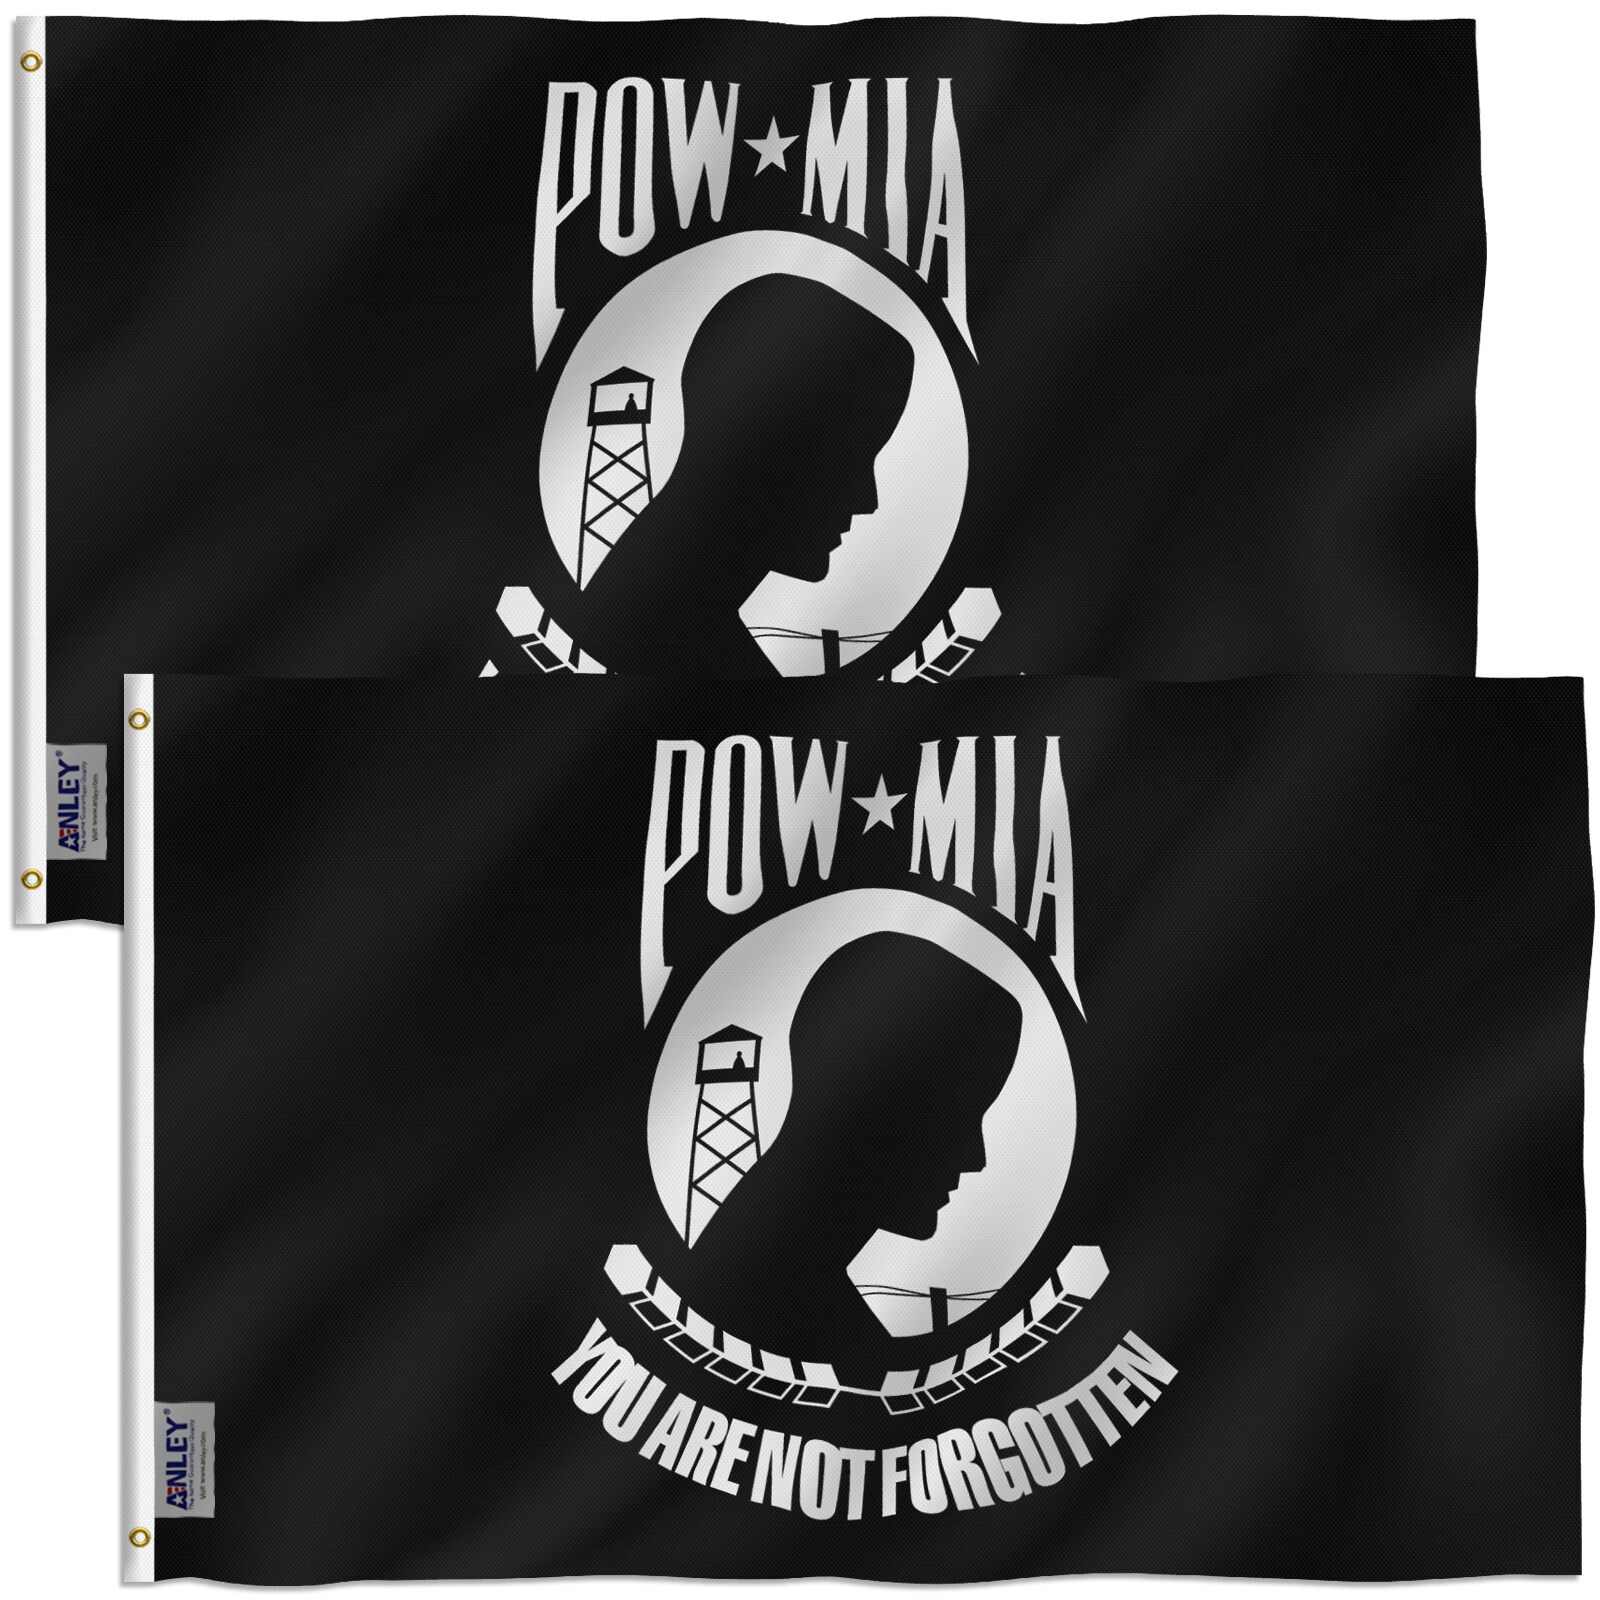 POW MIA You Are Not Forgotten Black Flag 3x5 w/ Grommets New!!